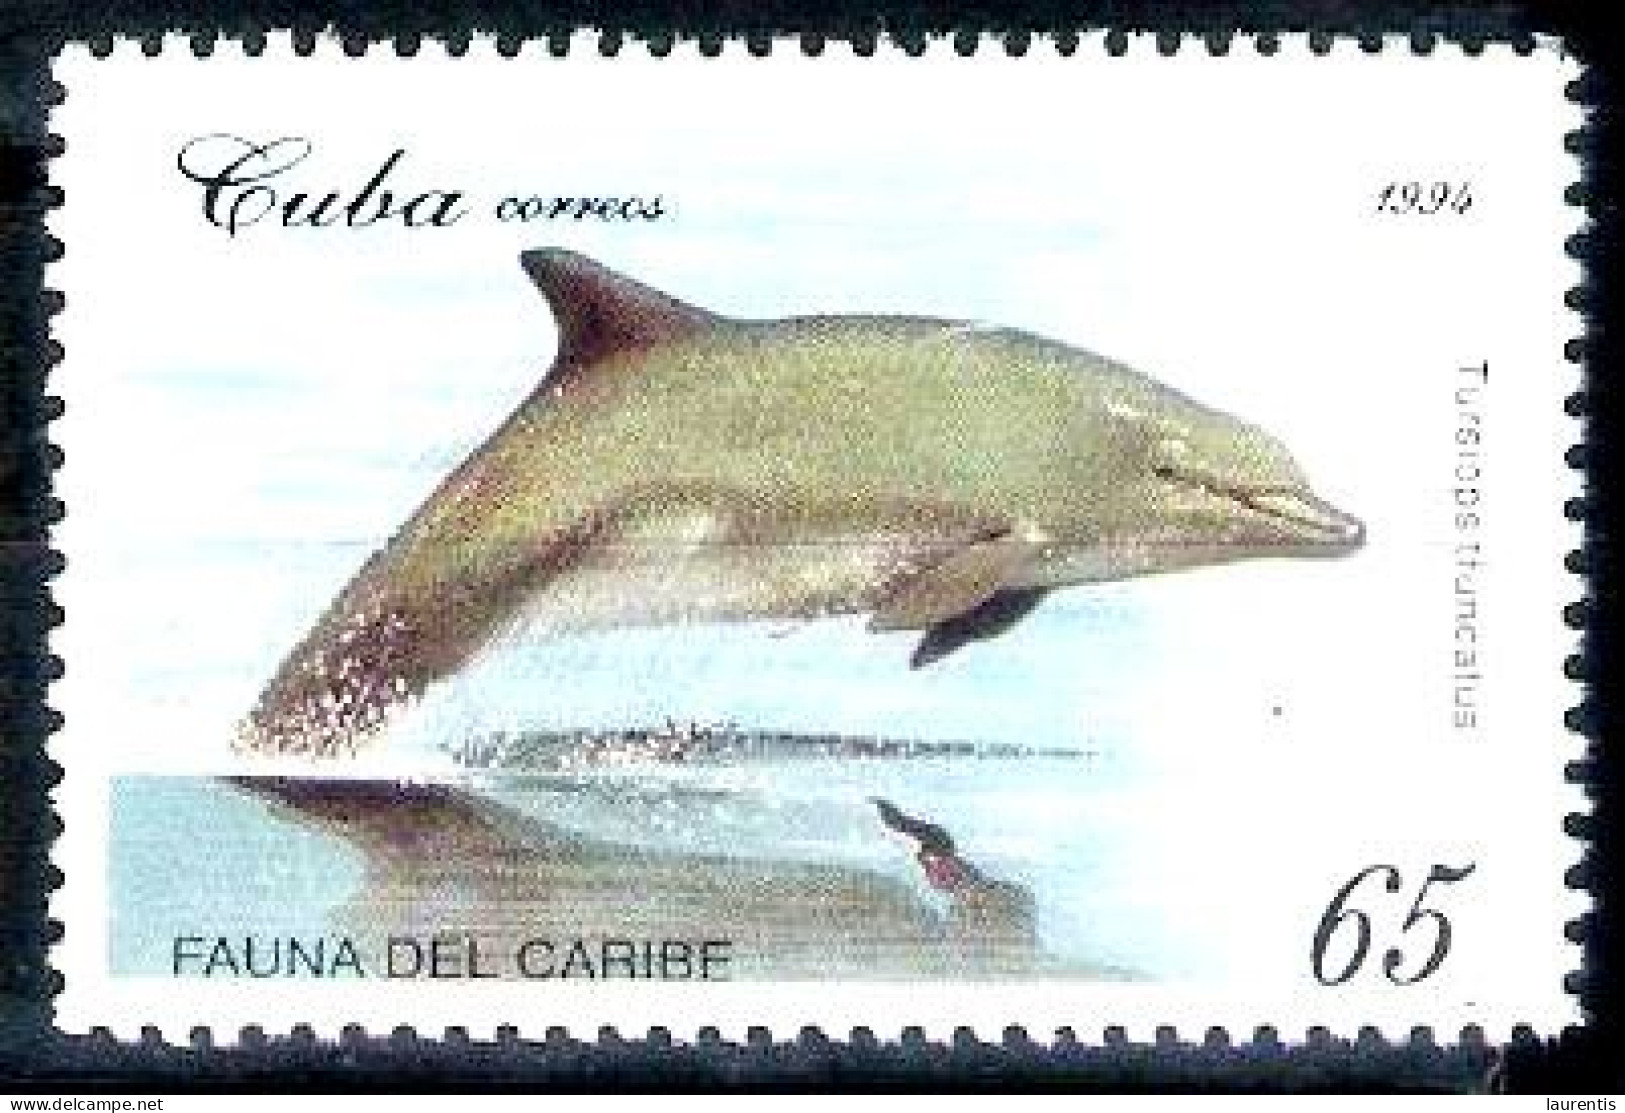 2858  Dolphins - Dauphins - 1994 - MNH - Only This Dolphin In The Stamp Set - Cb - 1,50. - Delfine